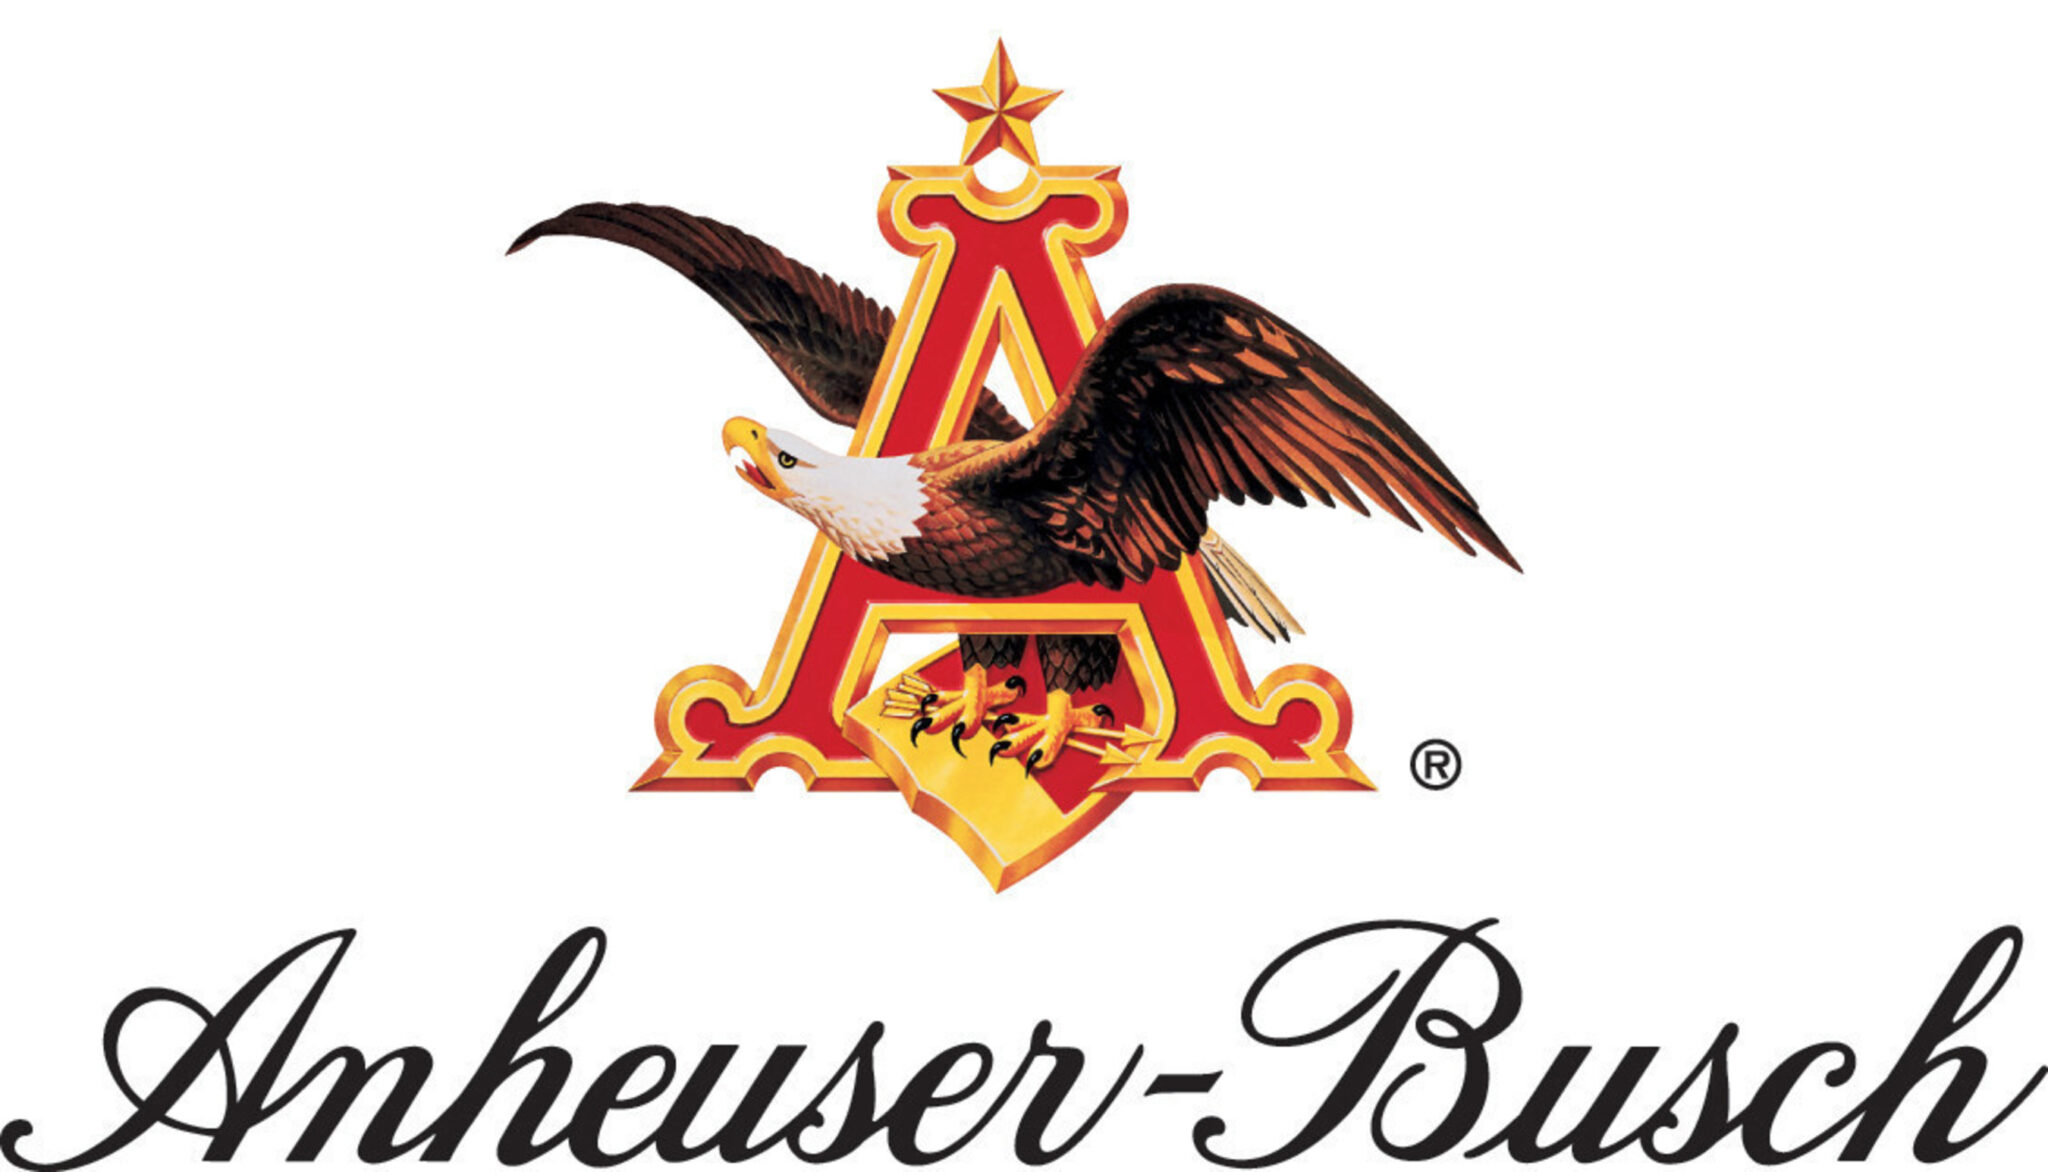 InCharge-Anheuser-Busch- Logo